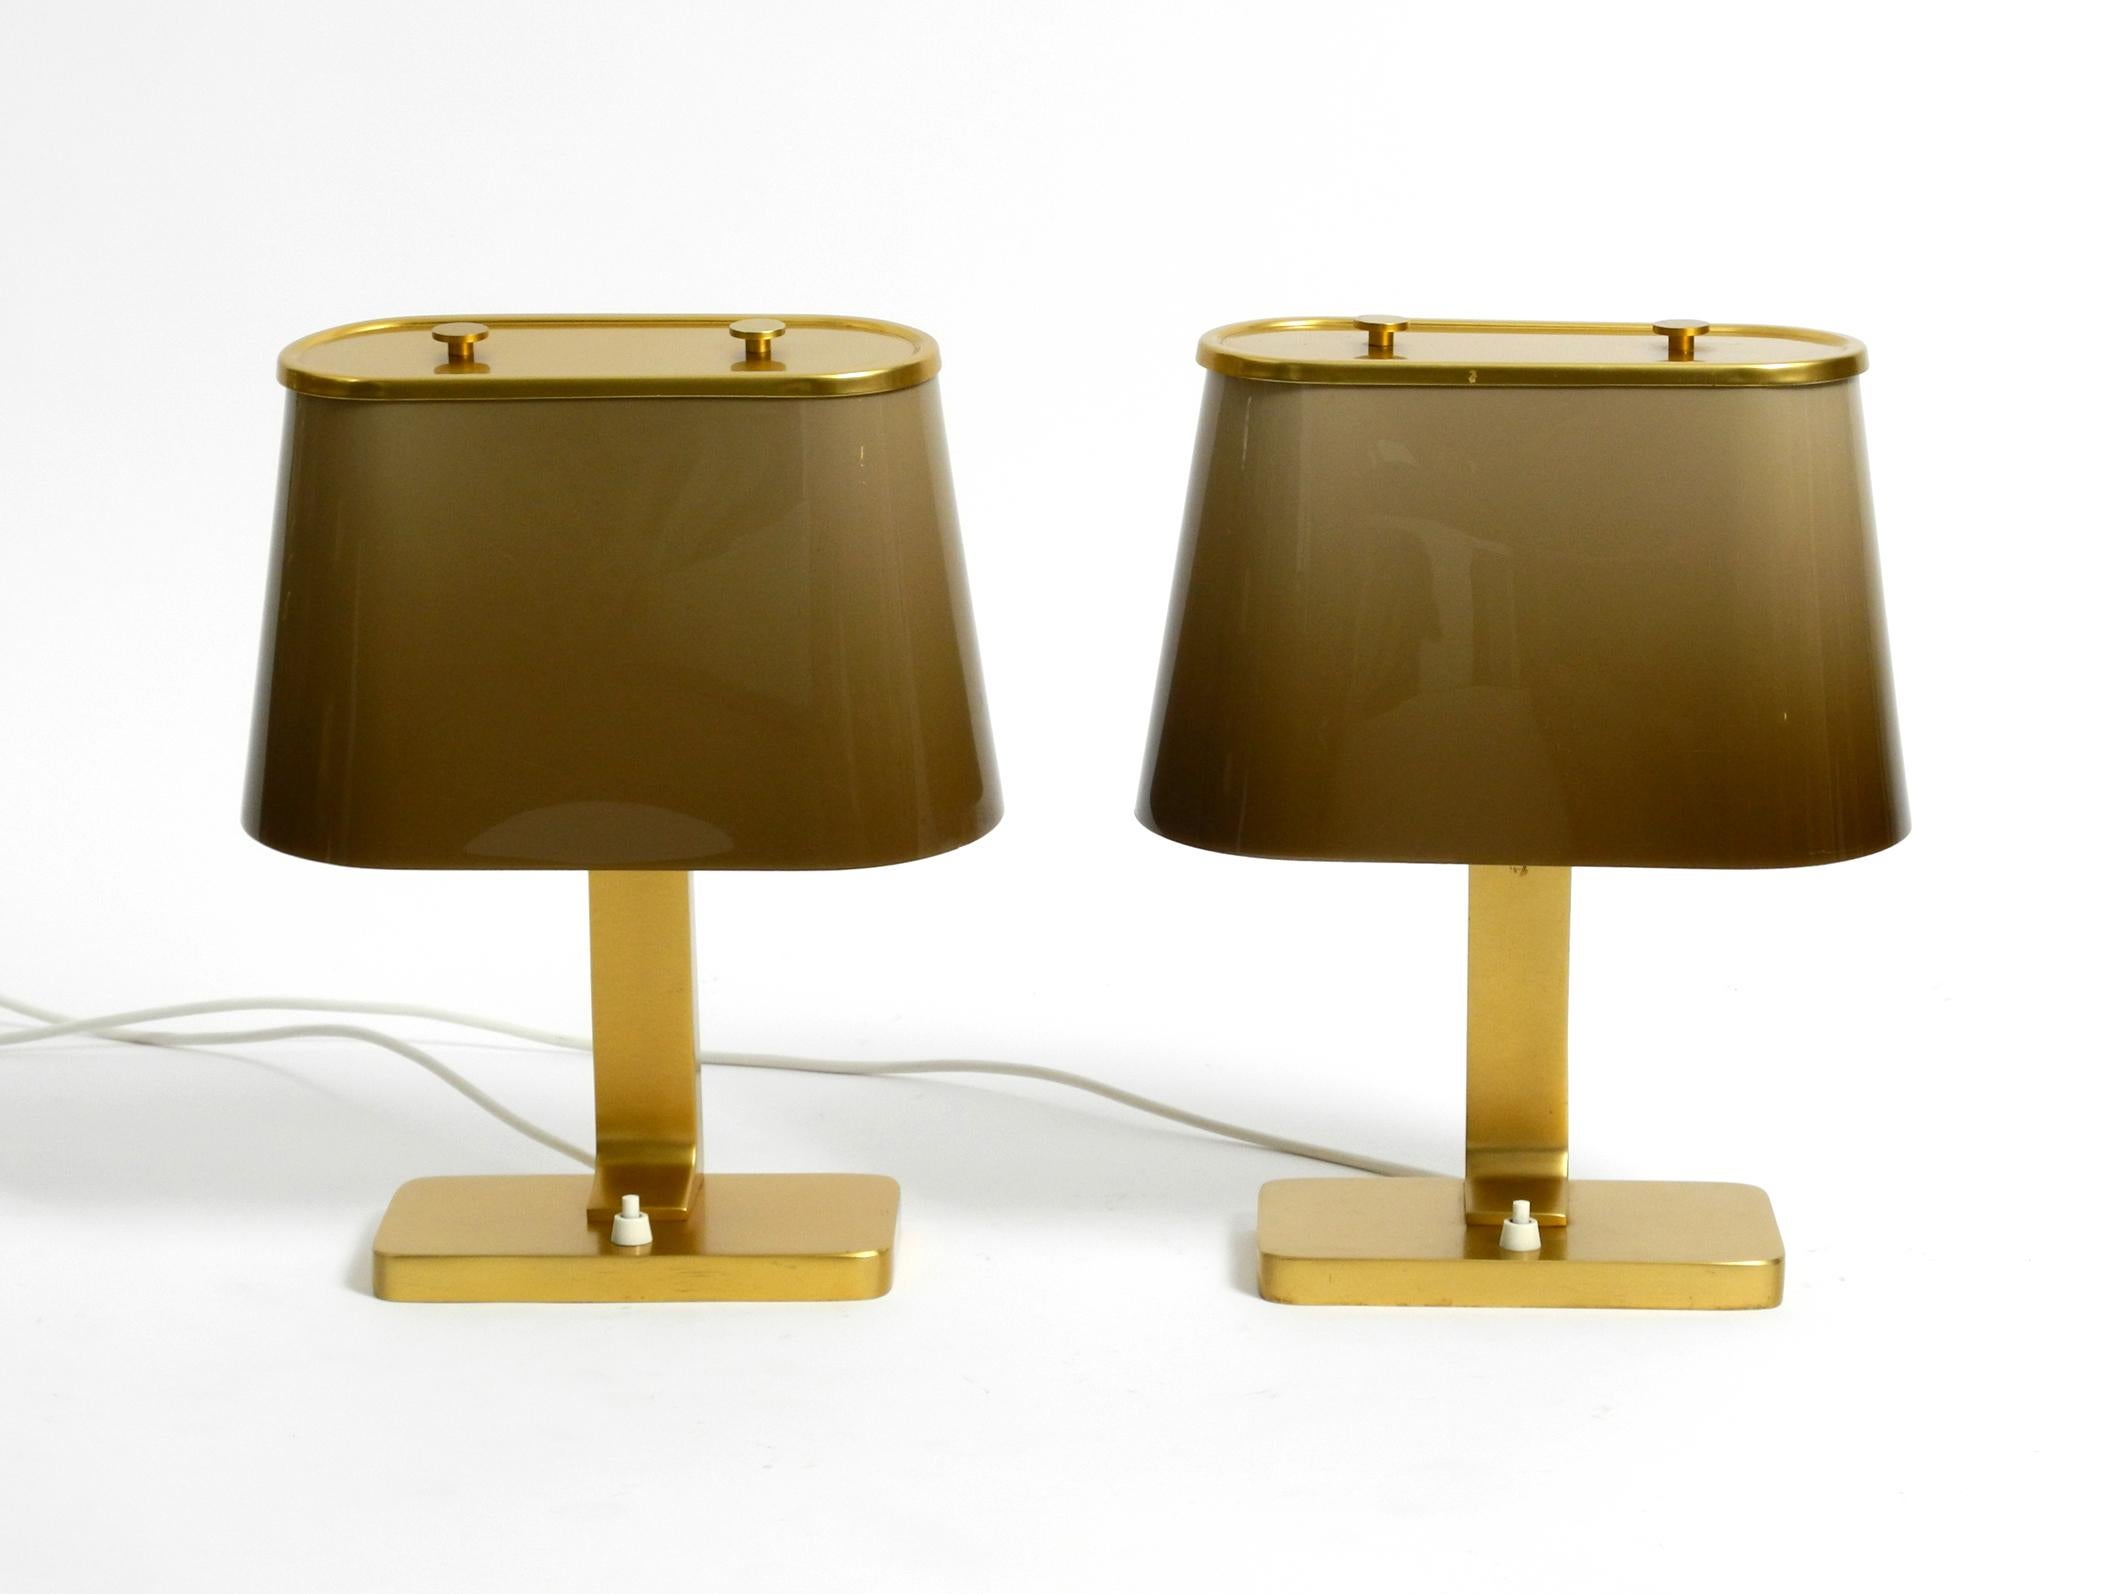 Pair of large rare 1960's Space Age table lamps with plastic shades.
Made in Italy. Great minimalist Space Age design.
Probably made by Guzzini. Reminds strongly of the manufacturer's design.
Heavy cast aluminum base and neck anodized in a golden